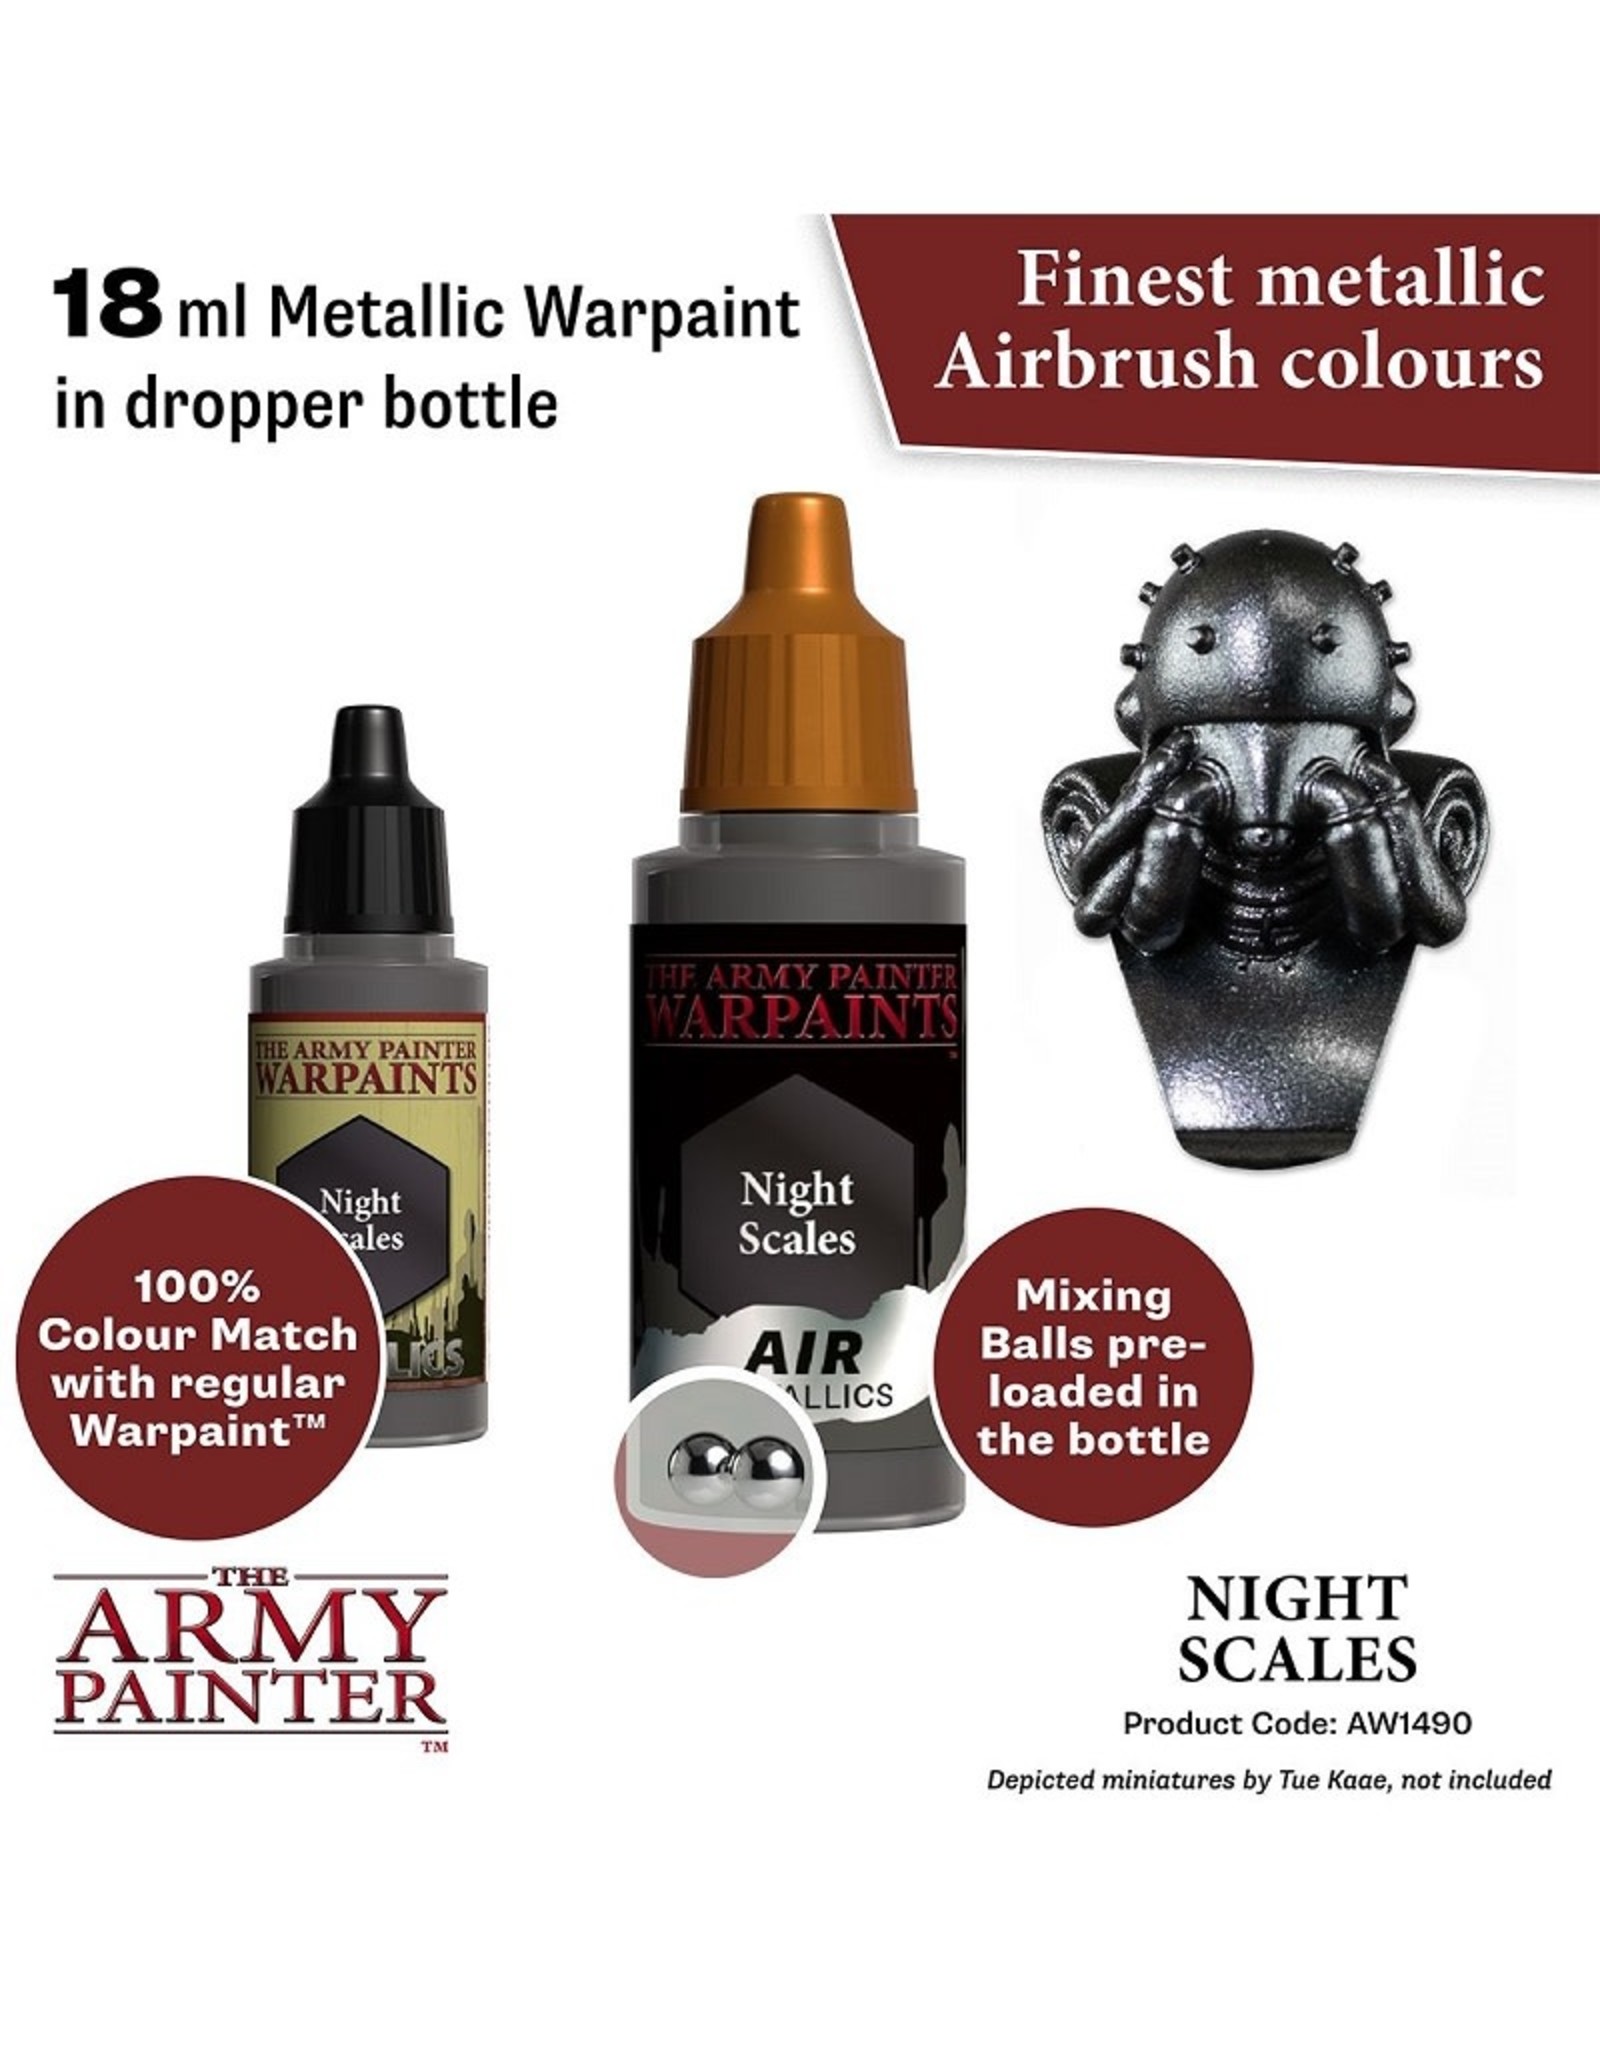 The Army Painter Warpaint Air: Metallics - Night Scales (18ml)